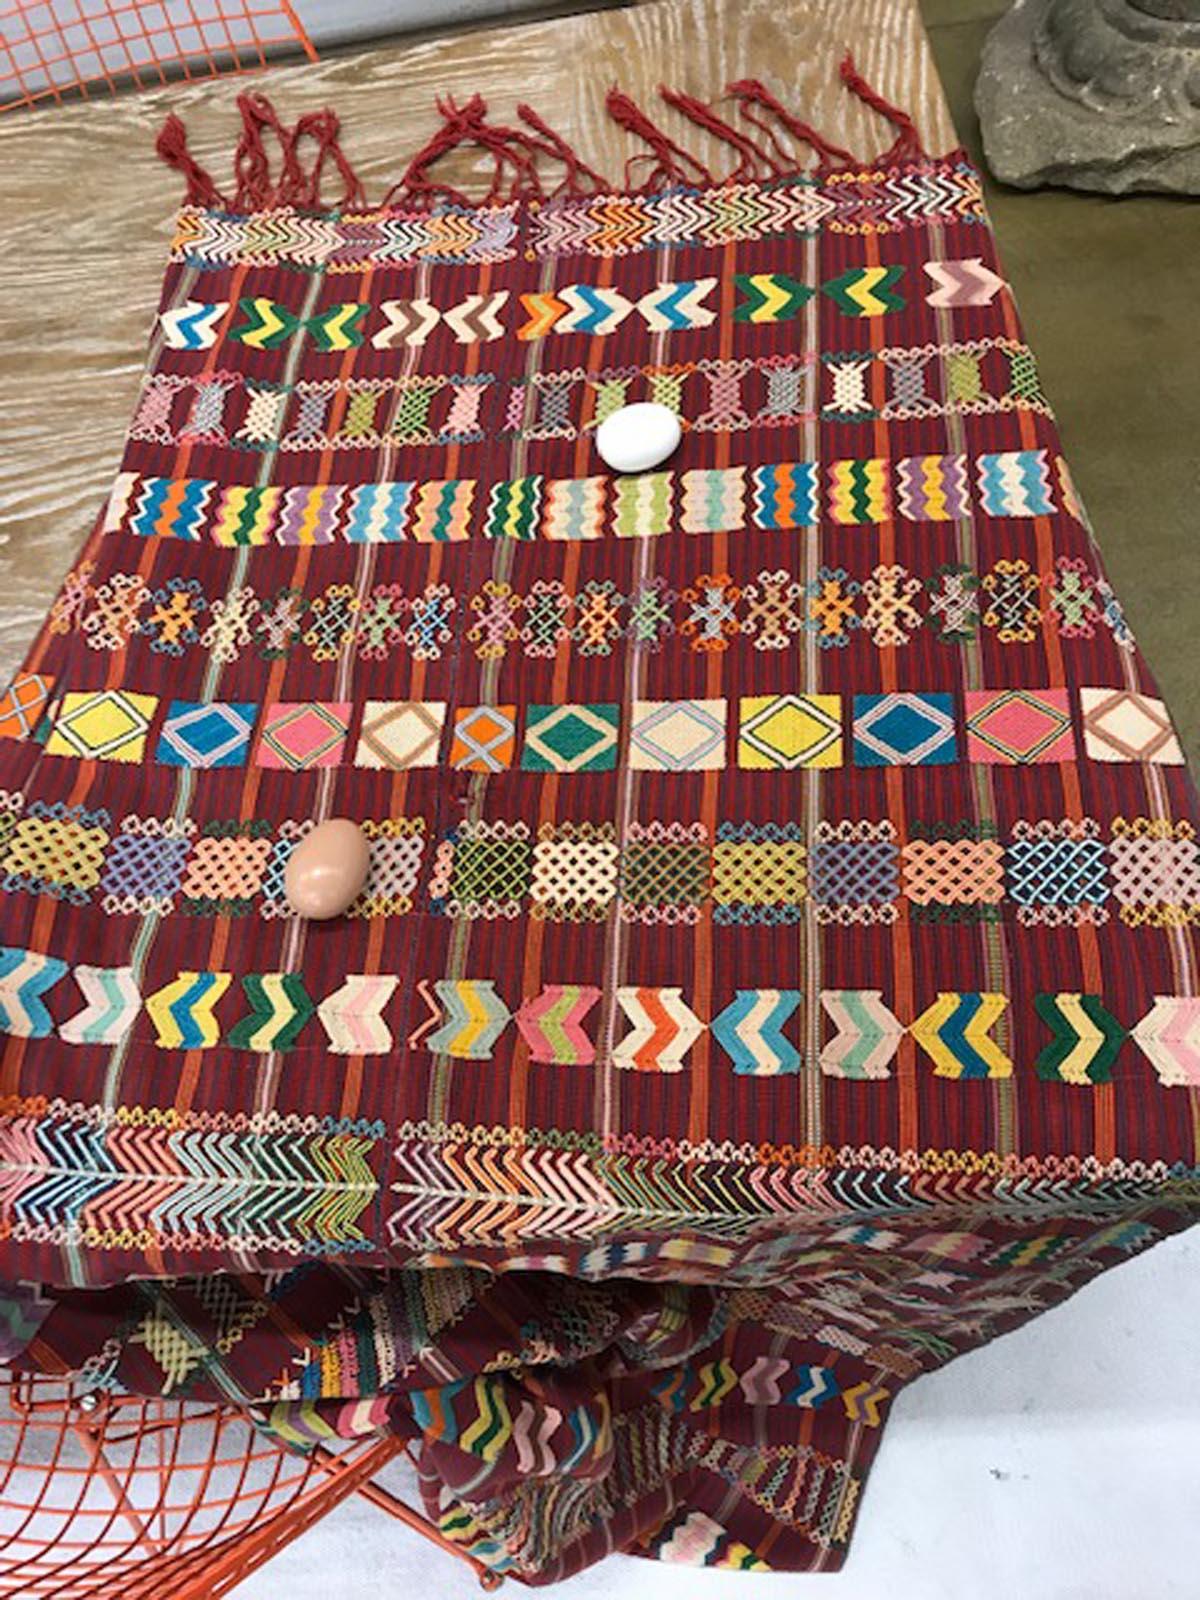 Vintage corte (skirt) from Guatemala. Fabric was handwoven on a back strap loom by indigenous Guatemalan women. Intricately hand embroidered with geometric designs. 
This example s is in excellent condition apart for one tiny hole. Long enough for